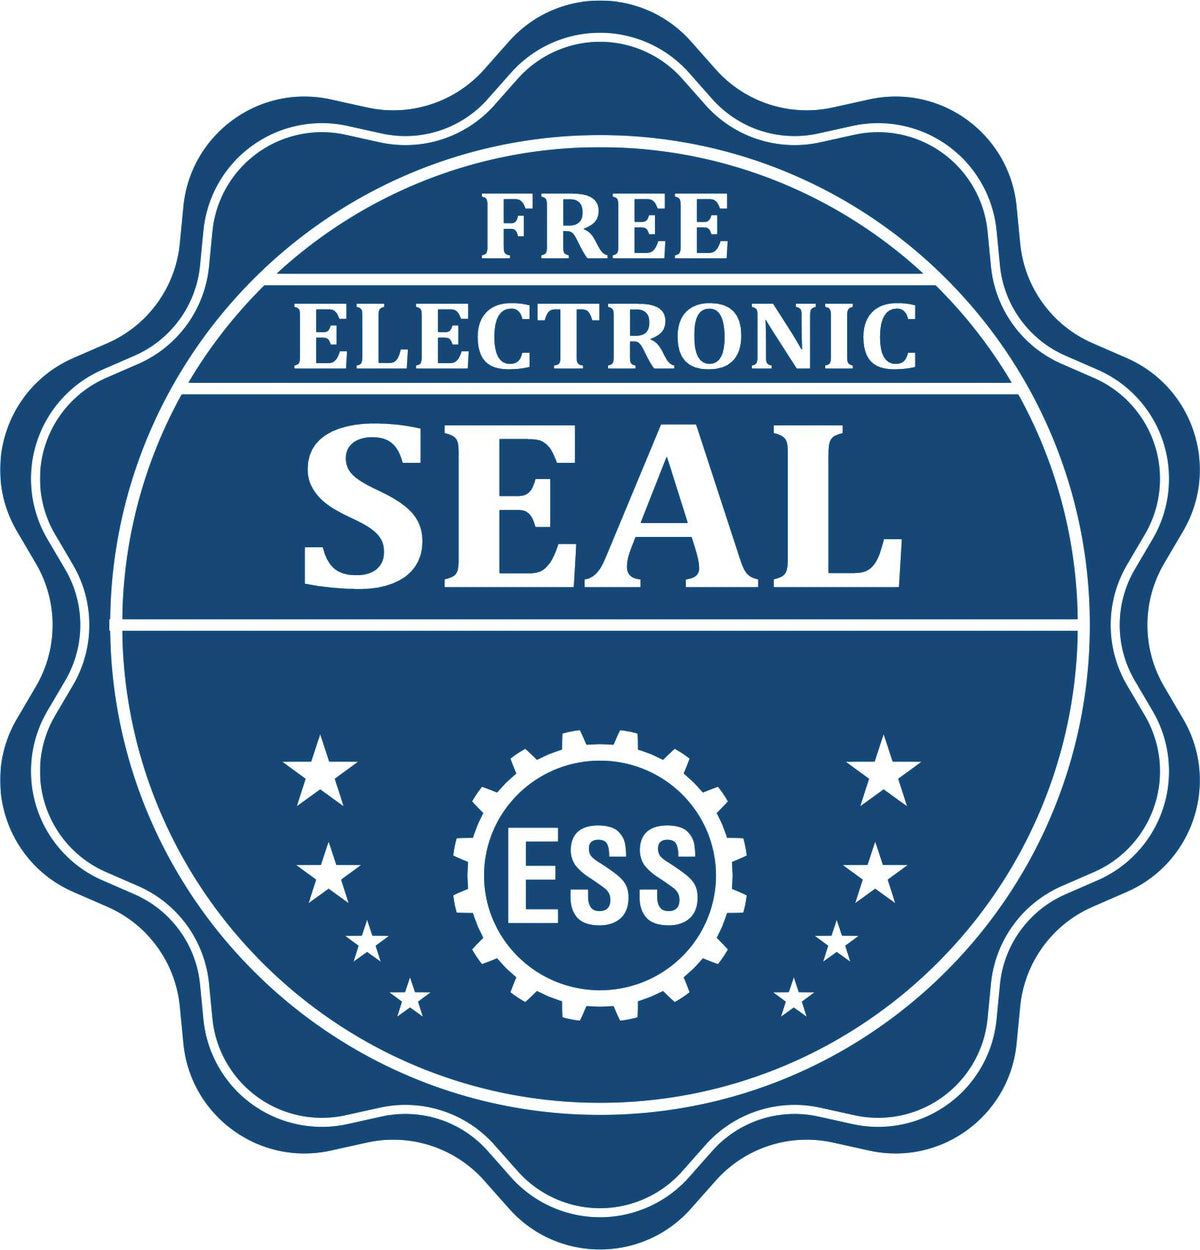 A badge showing a free electronic seal for the Hybrid Guam Architect Seal with stars and the ESS gear on the emblem.